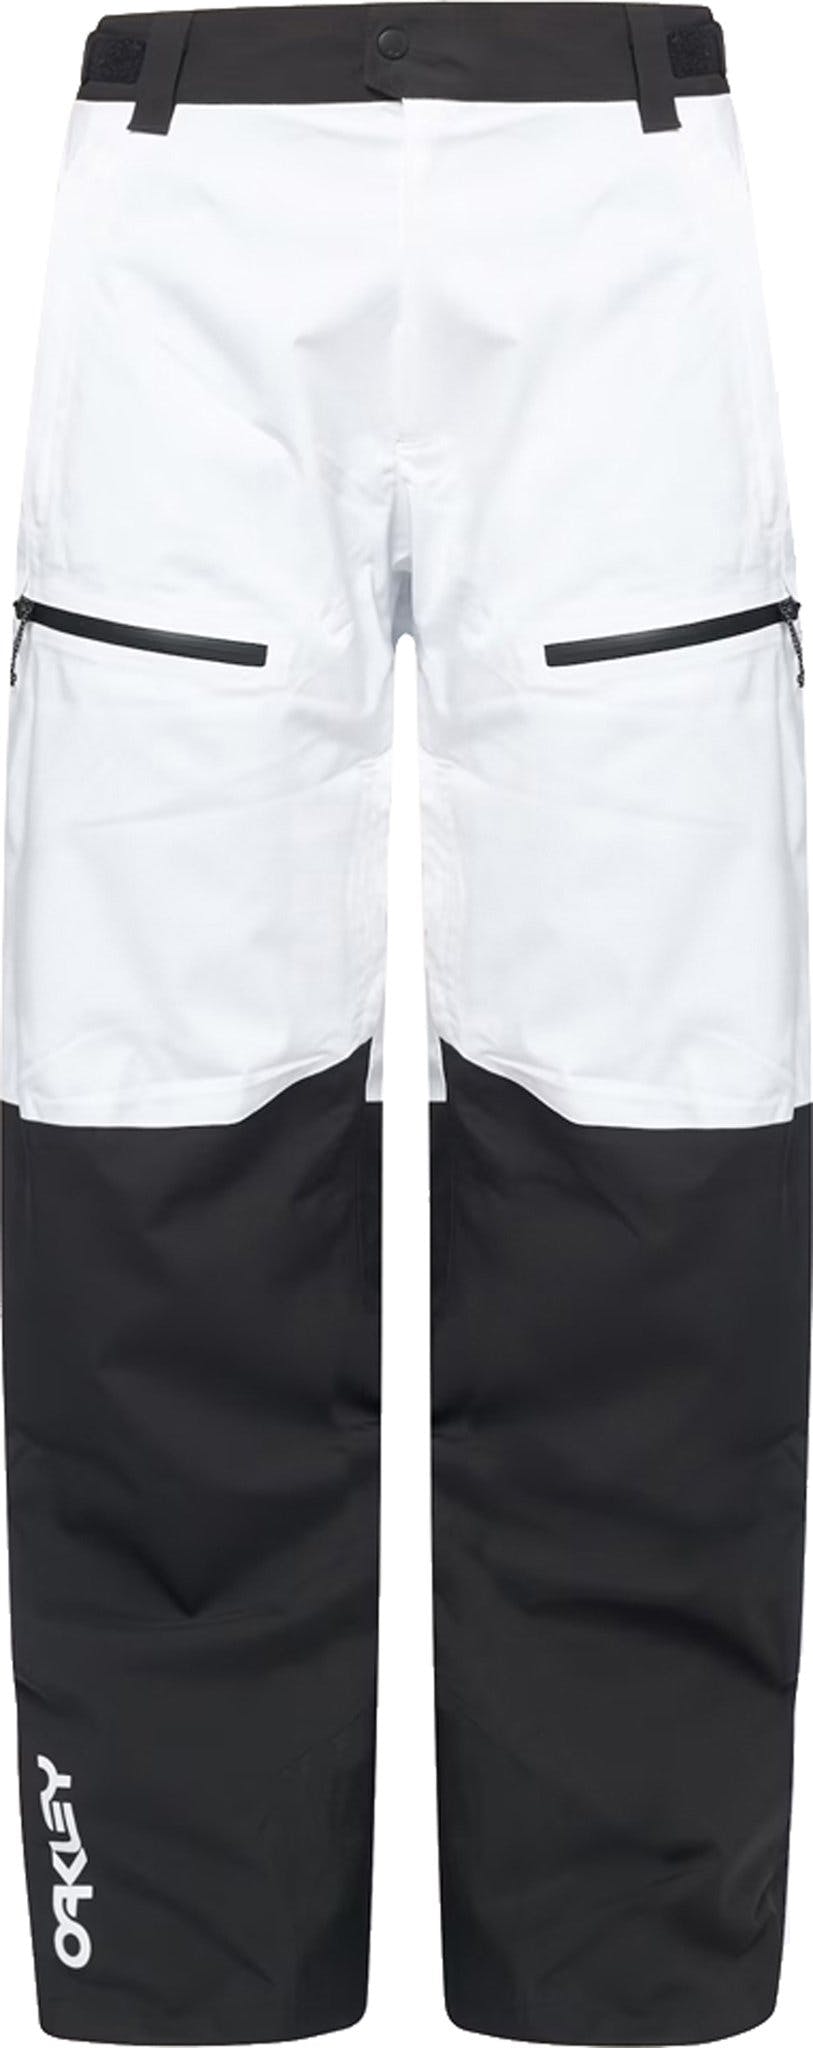 Product image for TNP Lined Shell 2.0 Pant - Men's